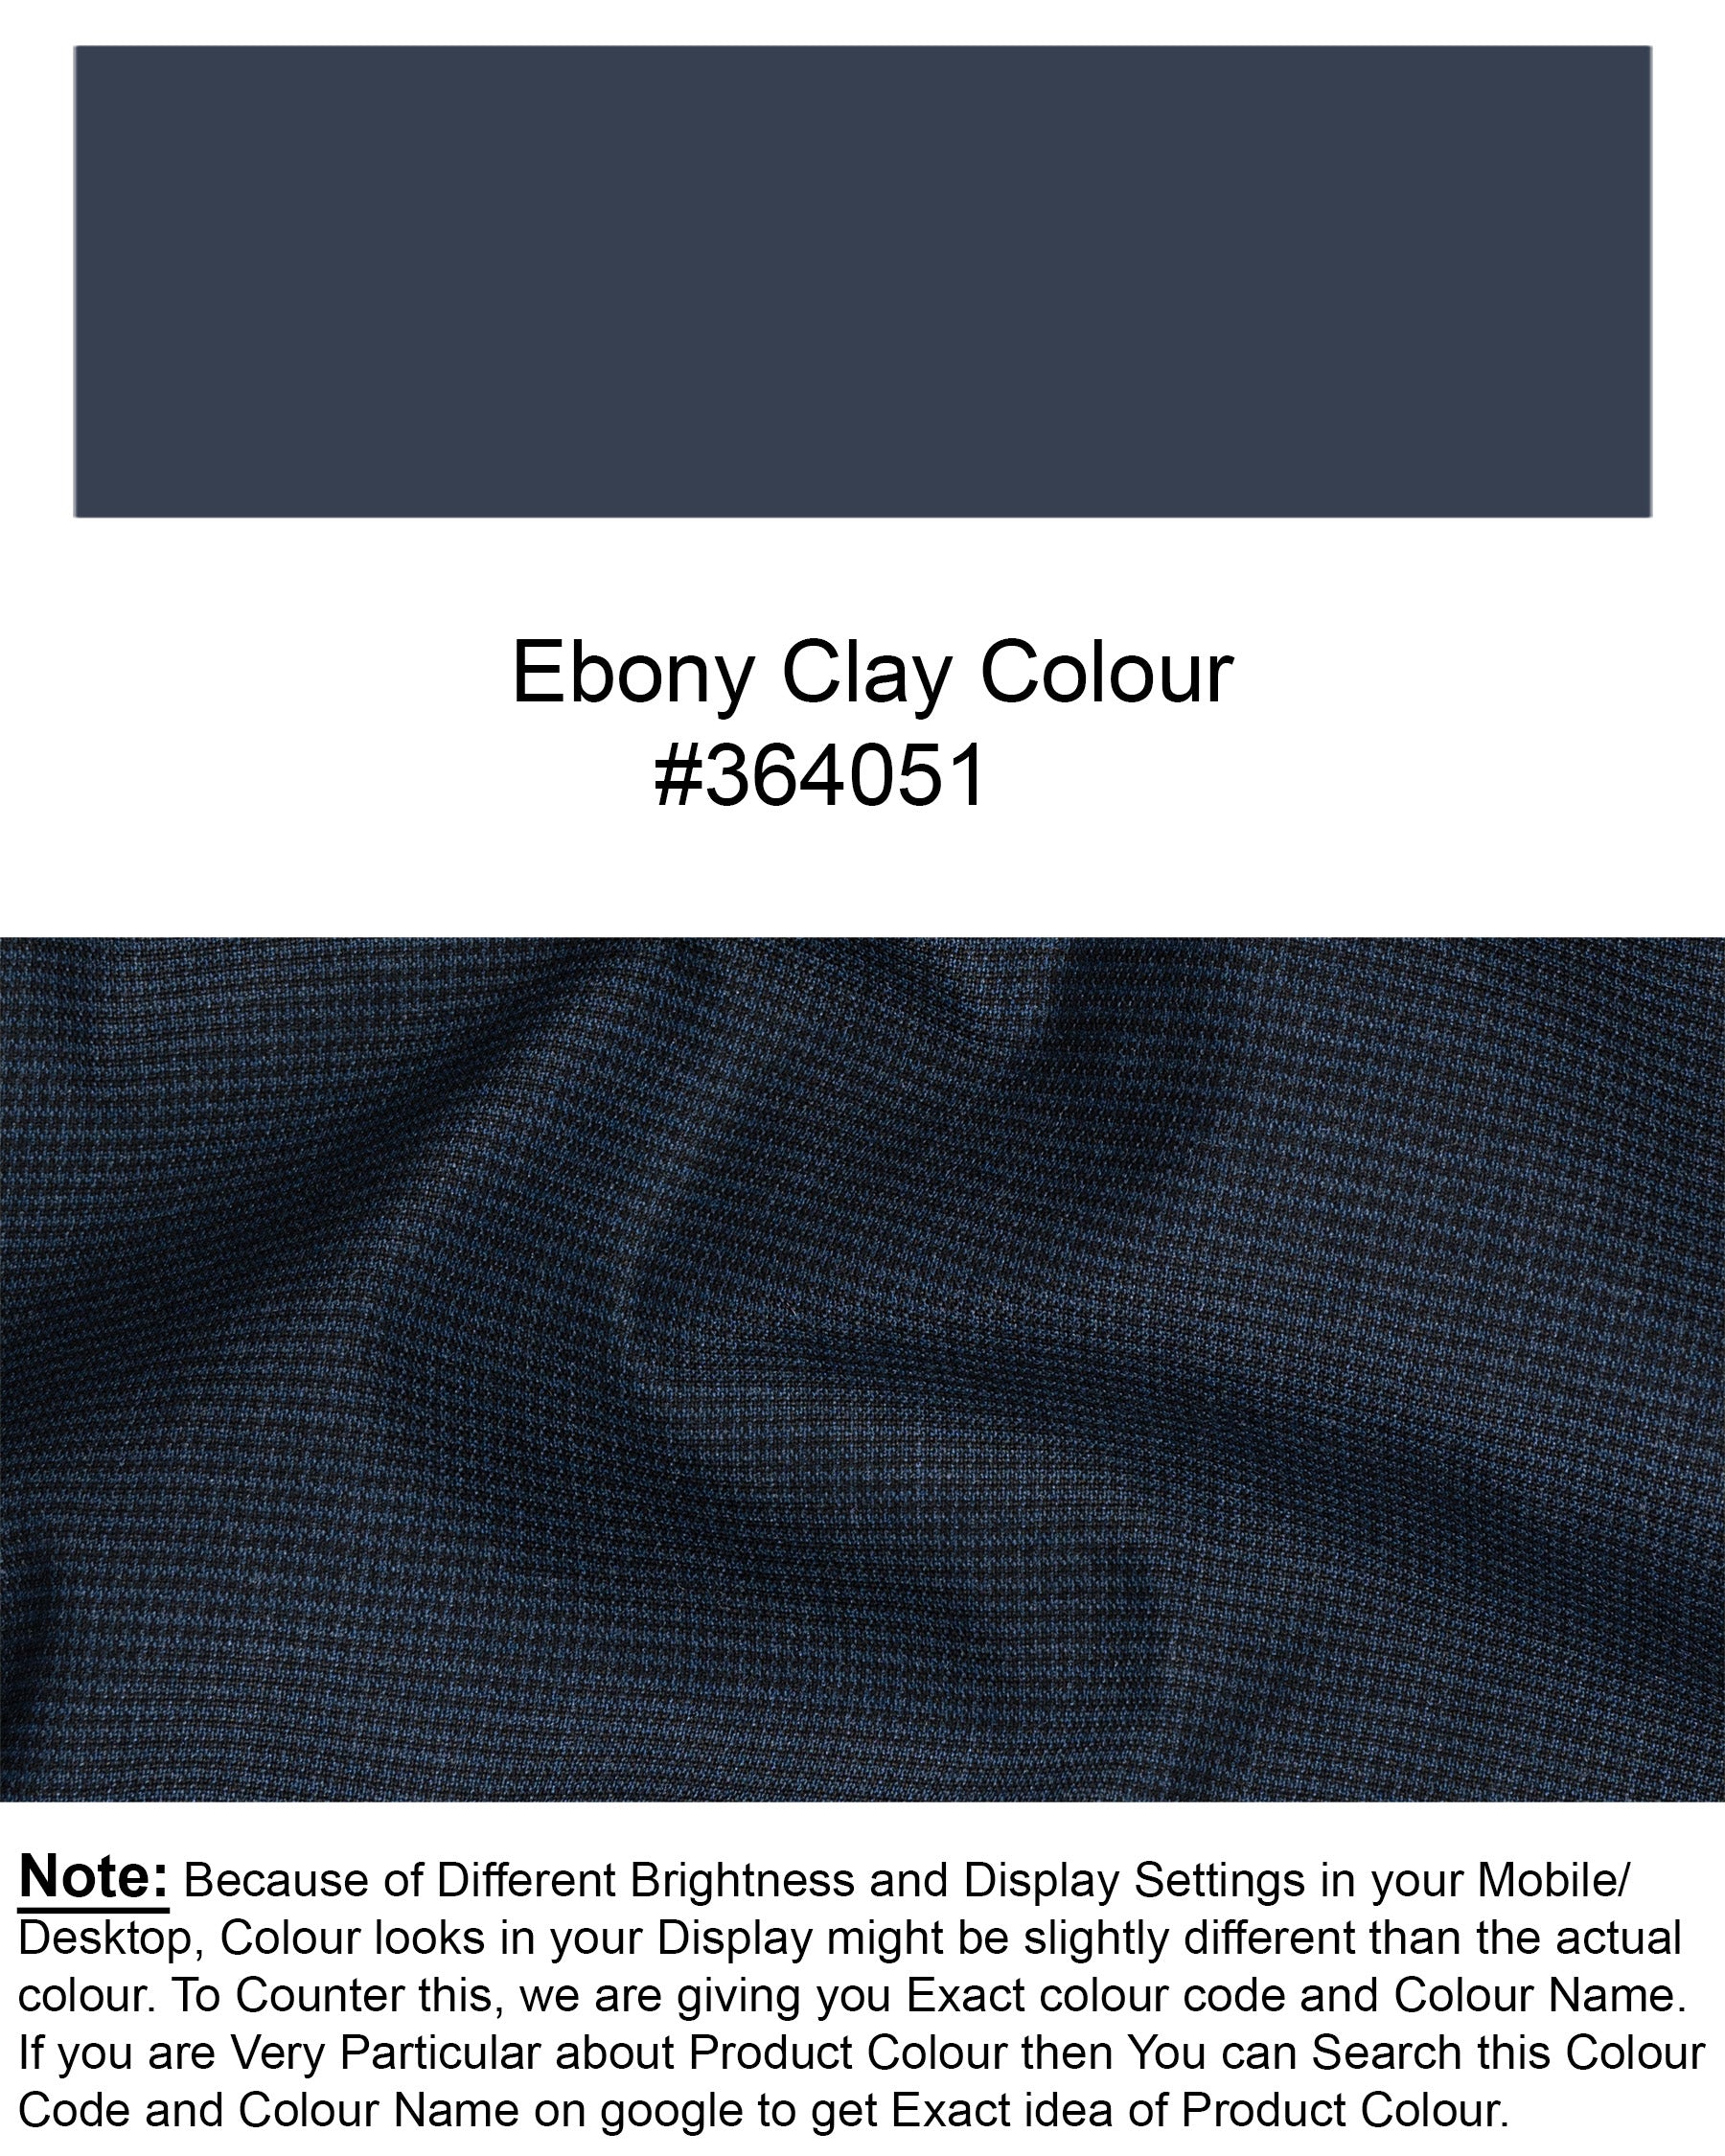 Ebony Clay Blue houndstooth Wool Rich Double Breasted BlazerBL1593-DB-36, BL1593-DB-38, BL1593-DB-40, BL1593-DB-42, BL1593-DB-44, BL1593-DB-46, BL1593-DB-48, BL1593-DB-50, BL1593-DB-52, BL1593-DB-54, BL1593-DB-56, BL1593-DB-58, BL1593-DB-60